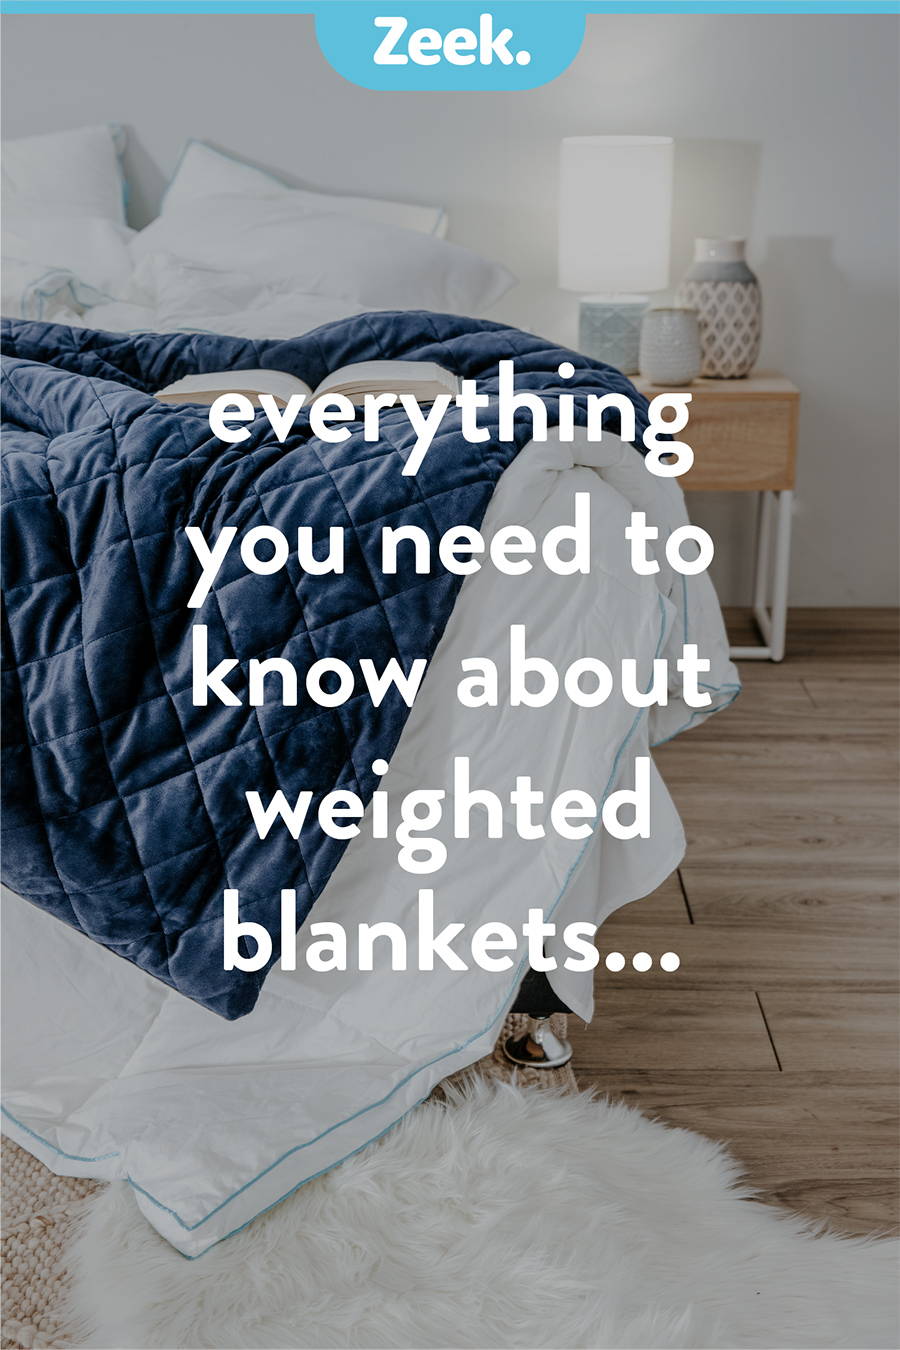 Everything You Need to Know About Weighted Blankets